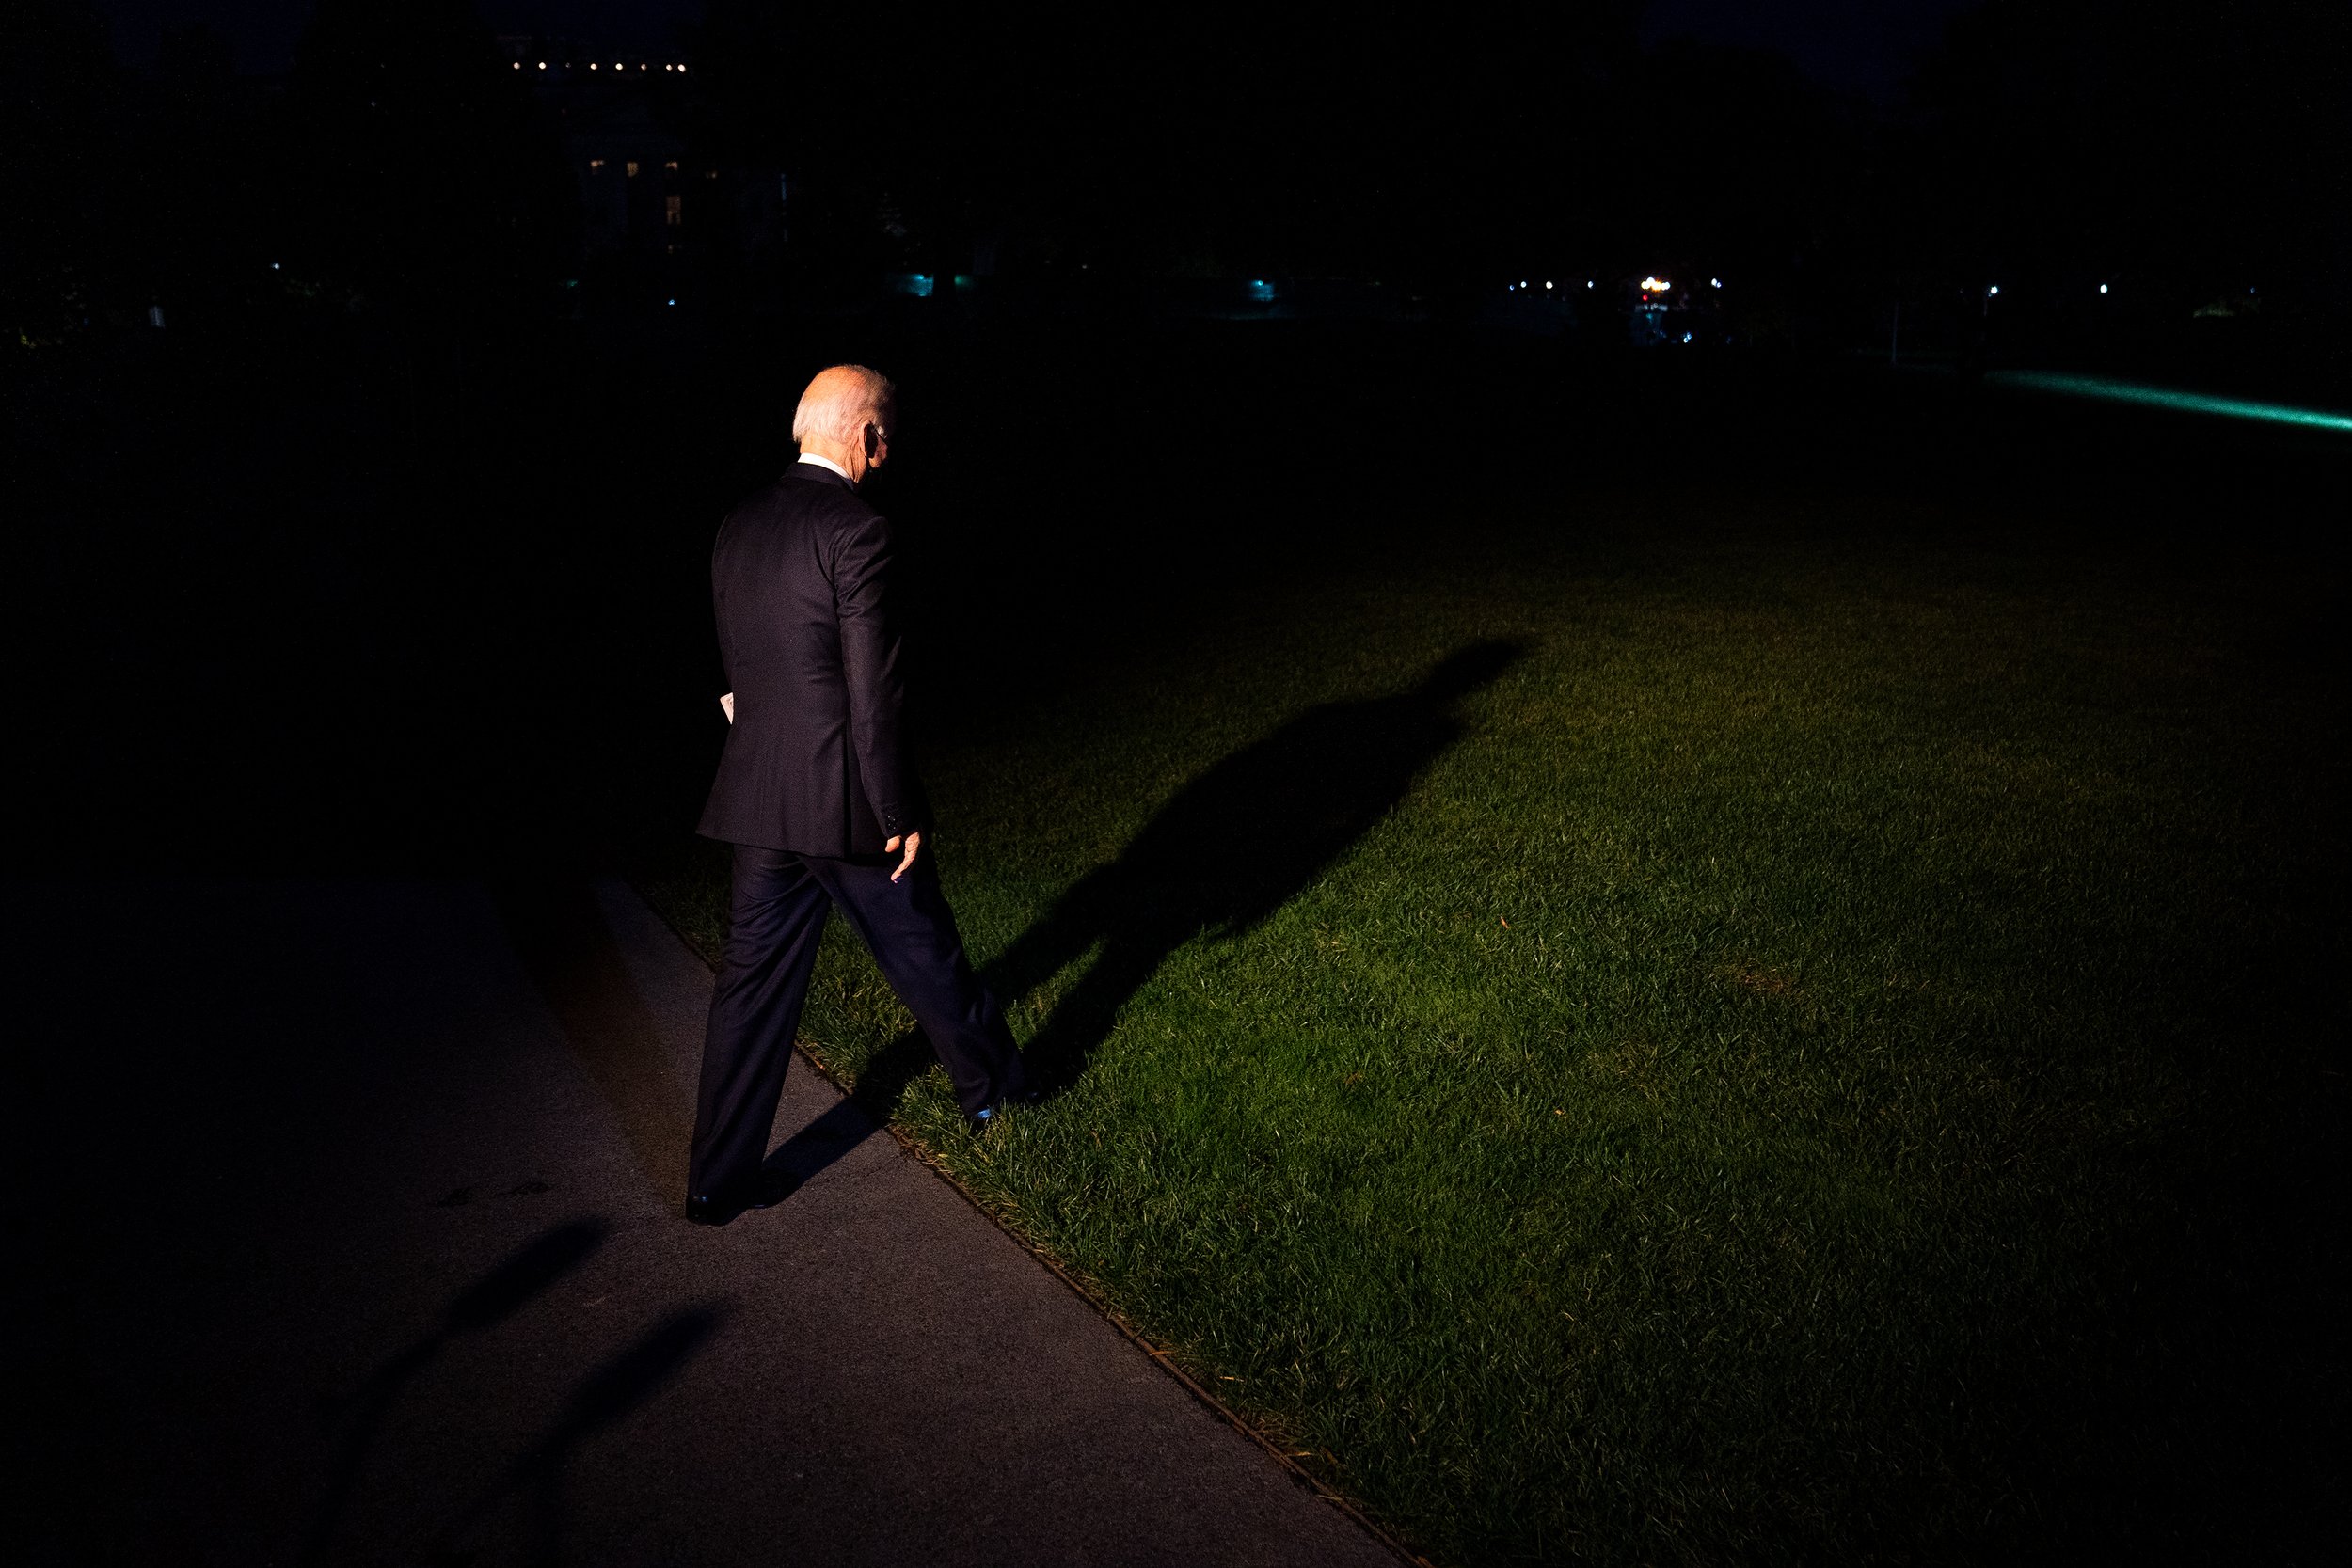  US President Joe Biden makes his way to board Marine One on the South Lawn at the White House. 